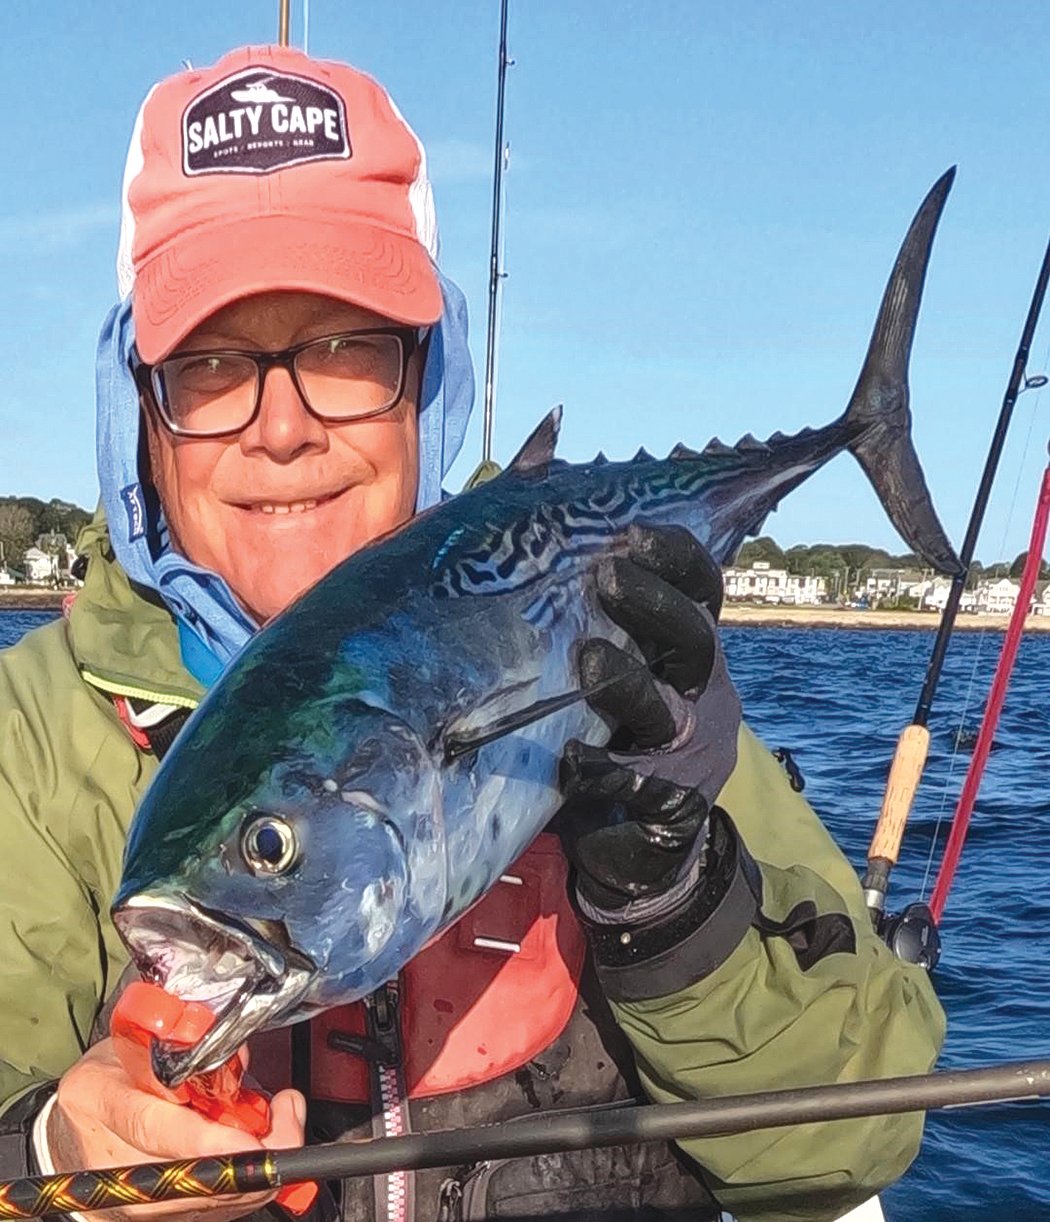 Tom Hood with a false albacore caught off Narragansett from his kayak. False albacore have grown in stature in the recreational fishing community. They are a data-poor stock.